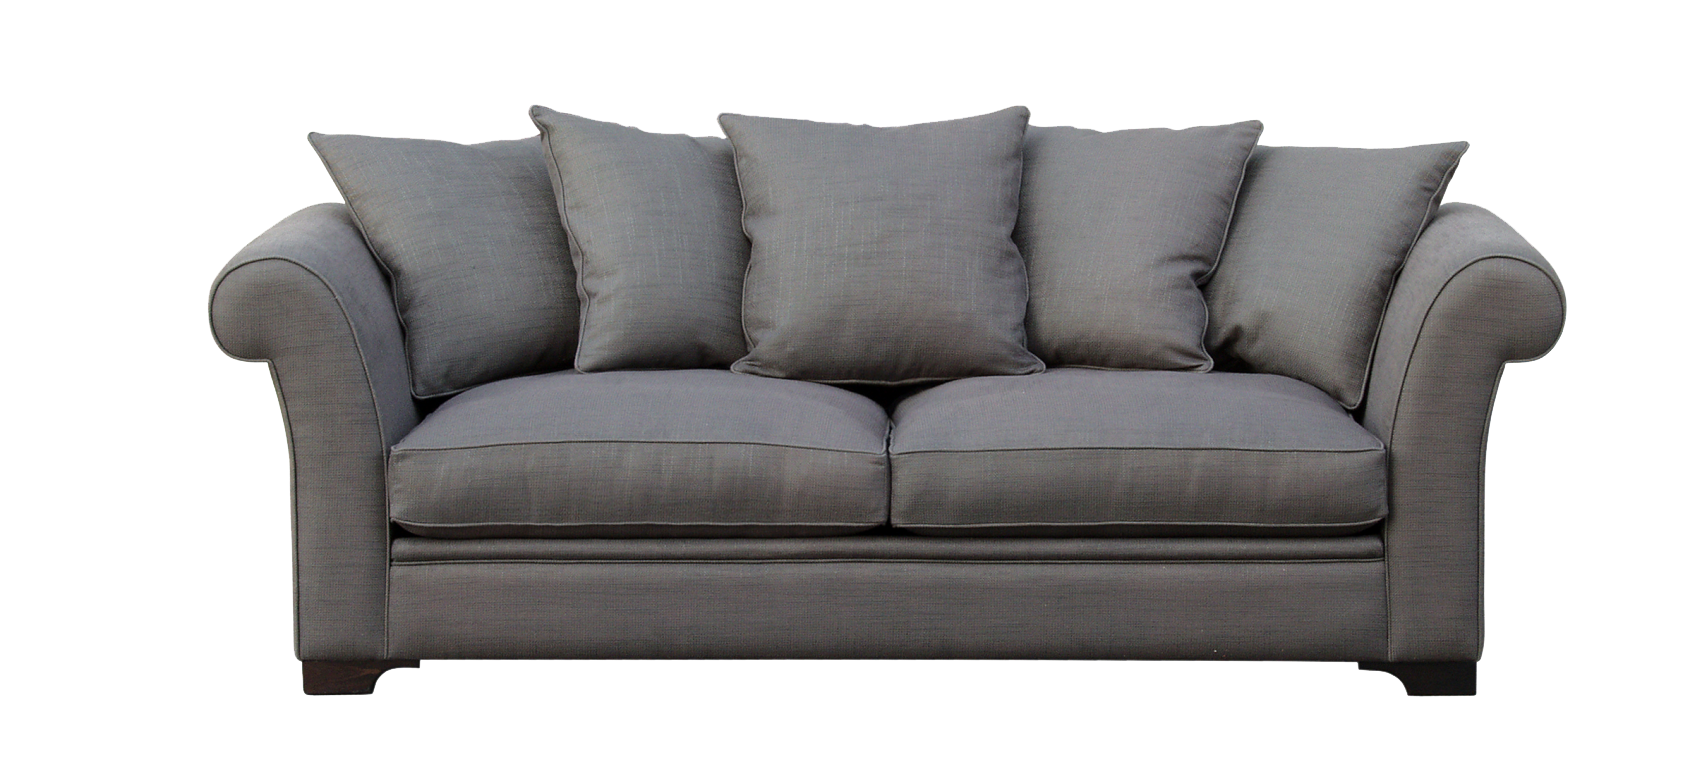 Couch PNG HD and HQ Image pngteam.com